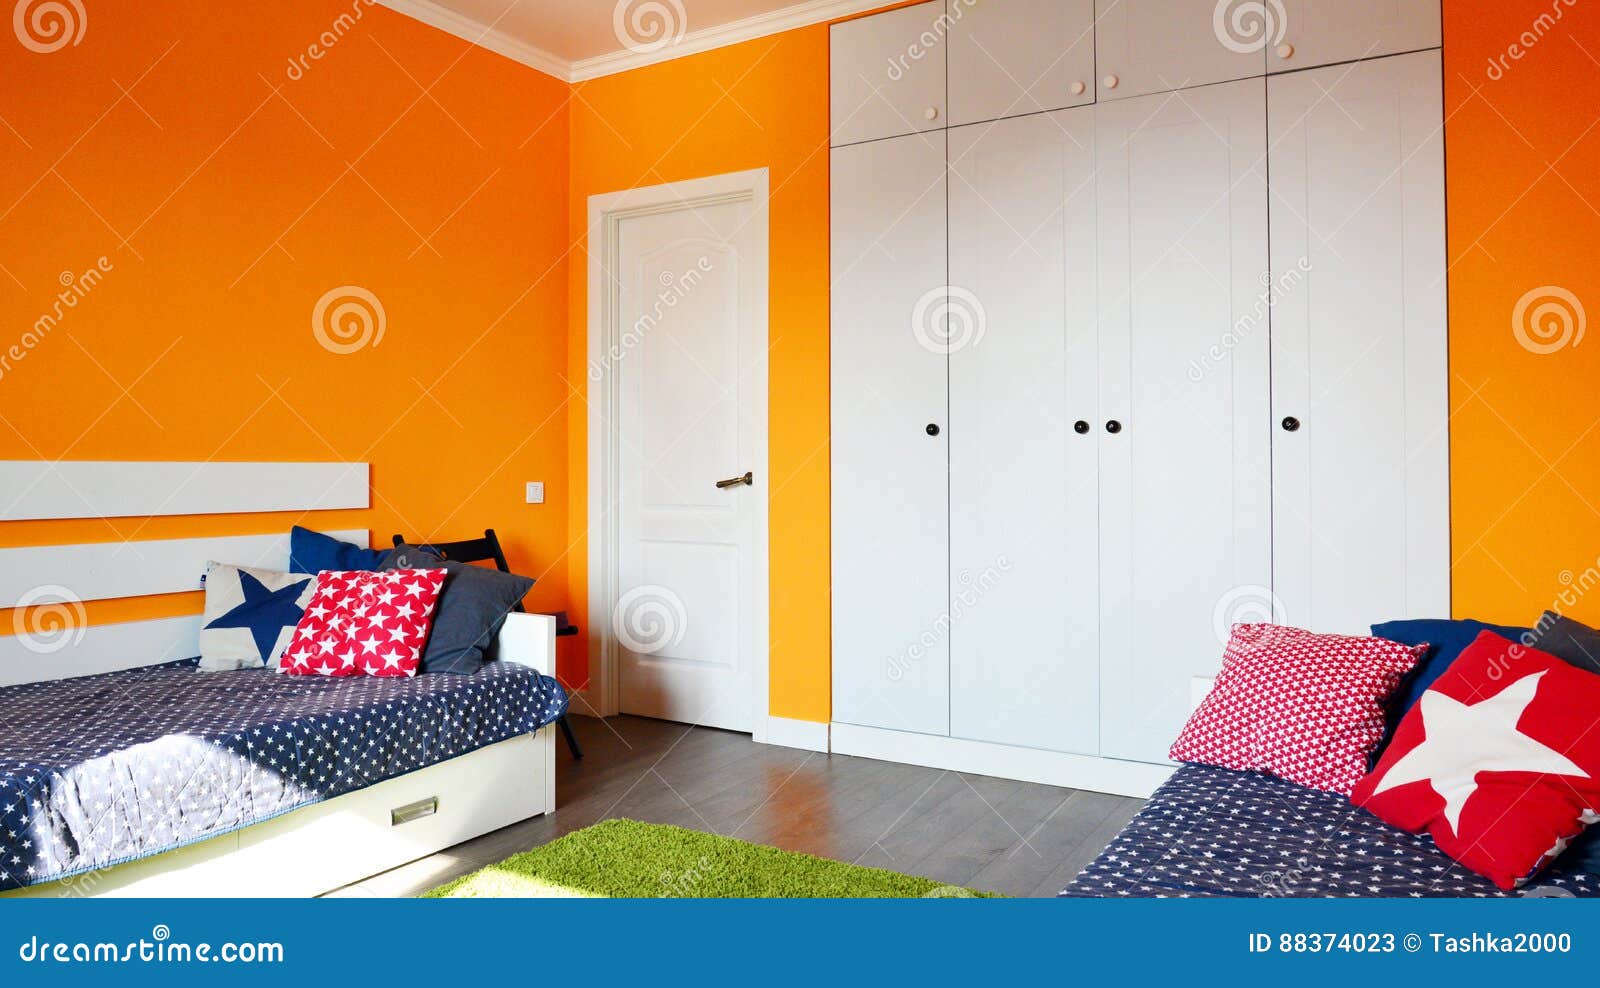 Kids Bedroom In Orange And Blue Colors Stock Image Image